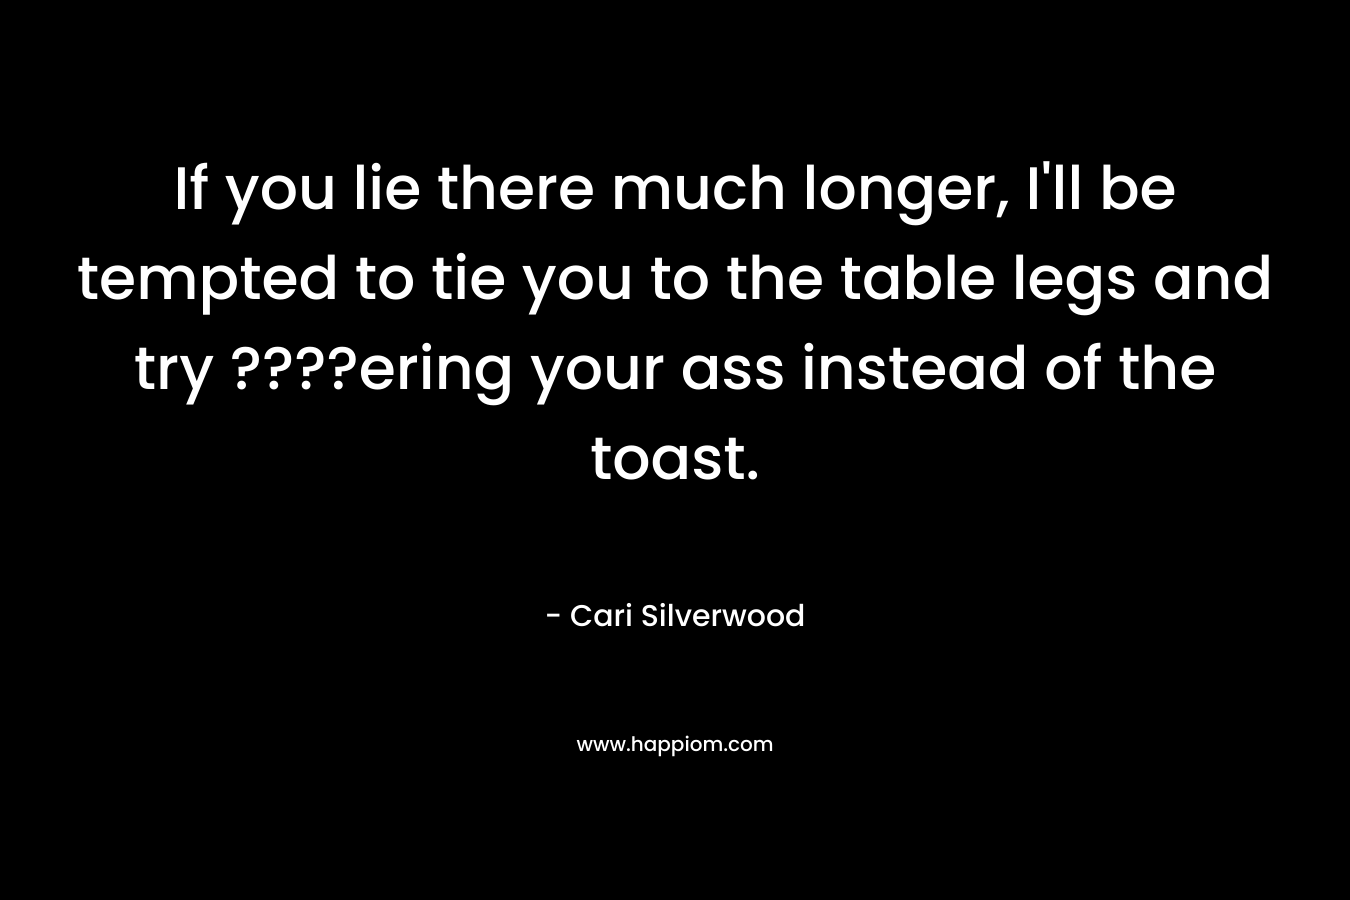 If you lie there much longer, I'll be tempted to tie you to the table legs and try ????ering your ass instead of the toast.